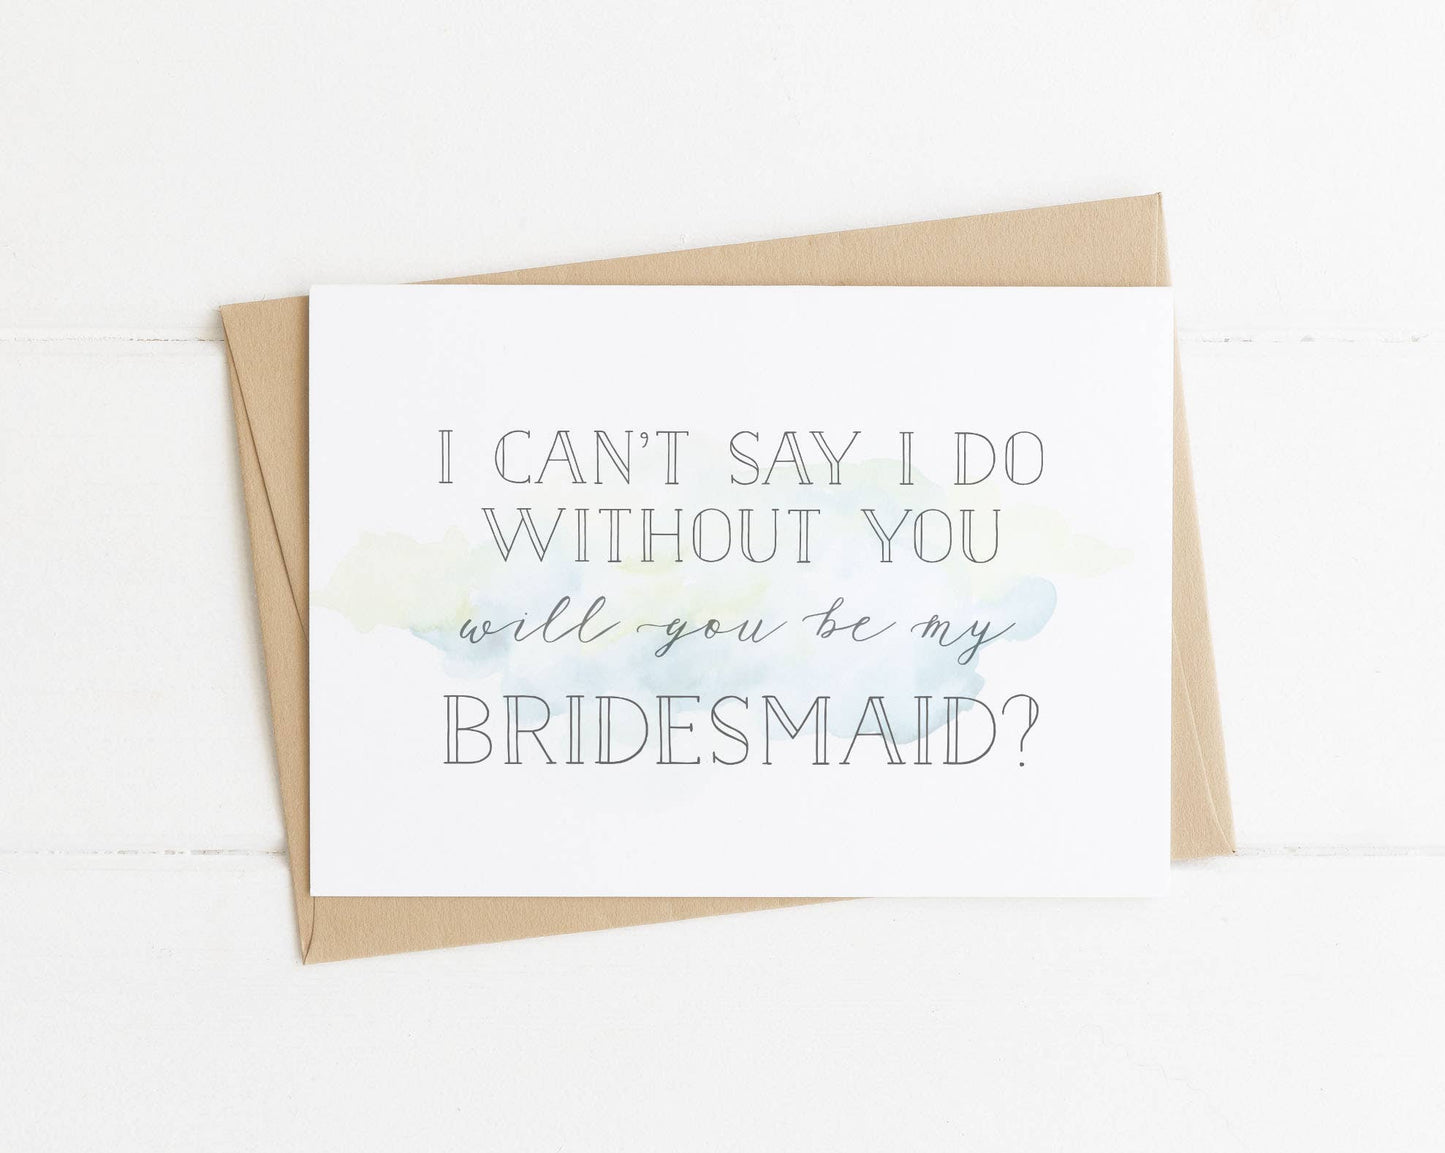 I Can't Say I Do Without You Bridesmaid Proposal Card - Blue